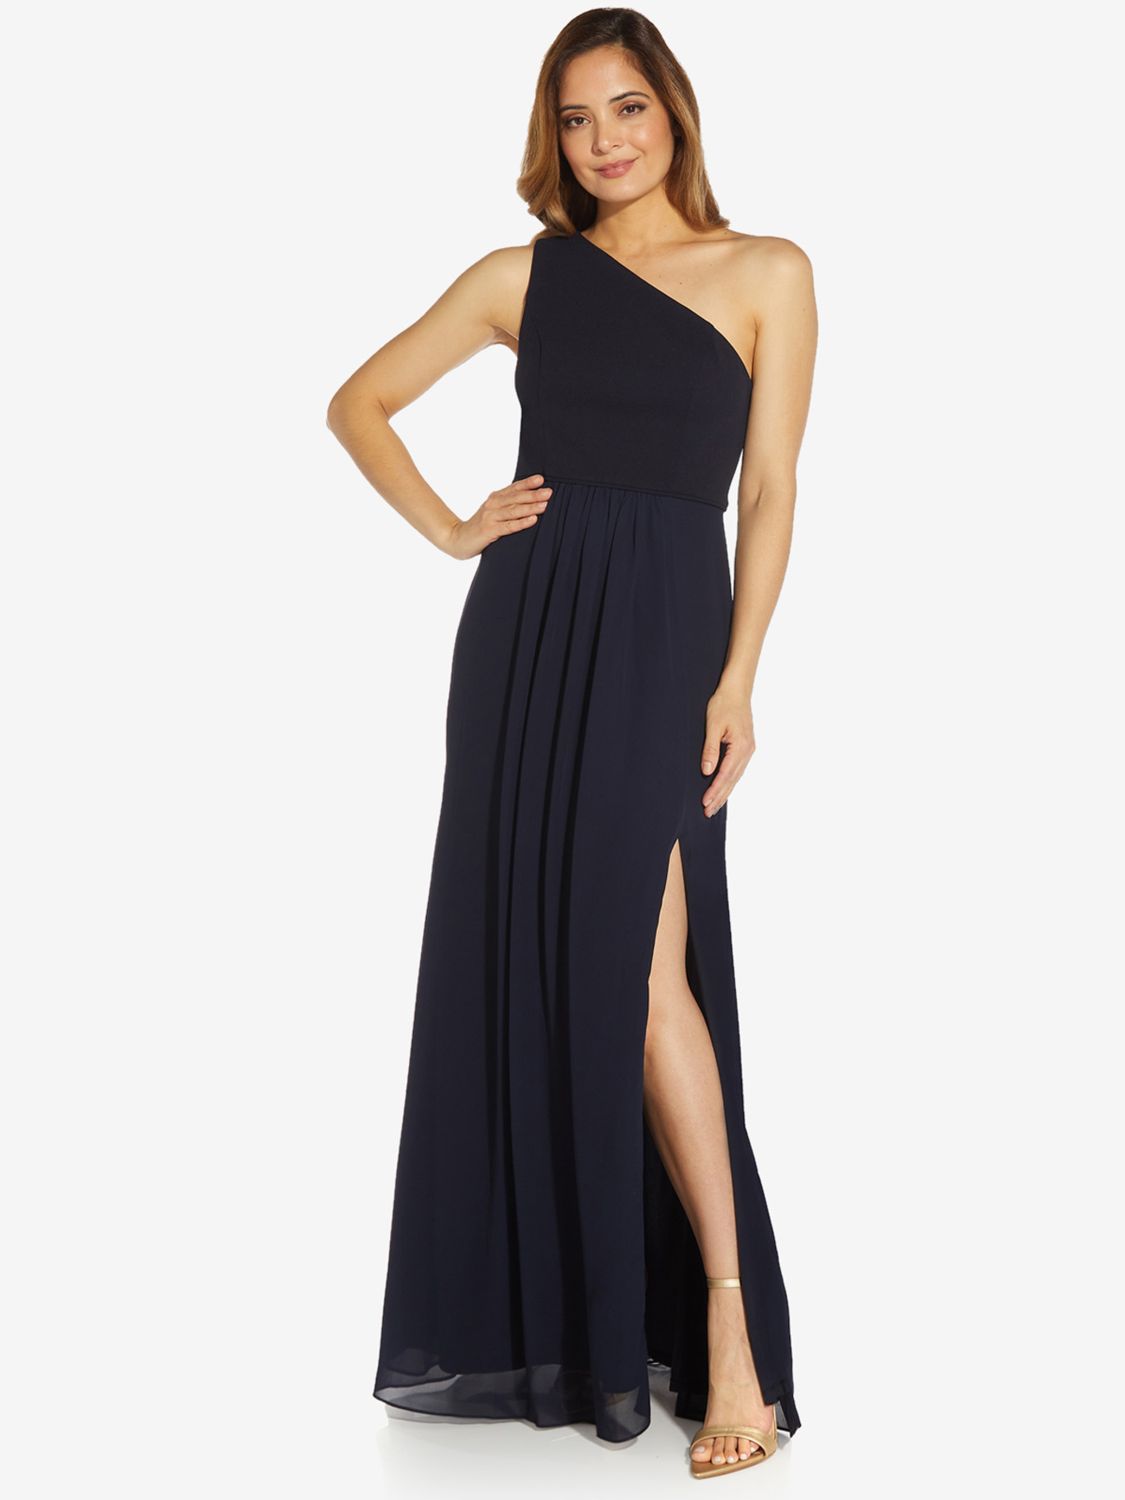 Adrianna Papell One Shoulder Chiffon Gown, Midnight at John Lewis & Partners